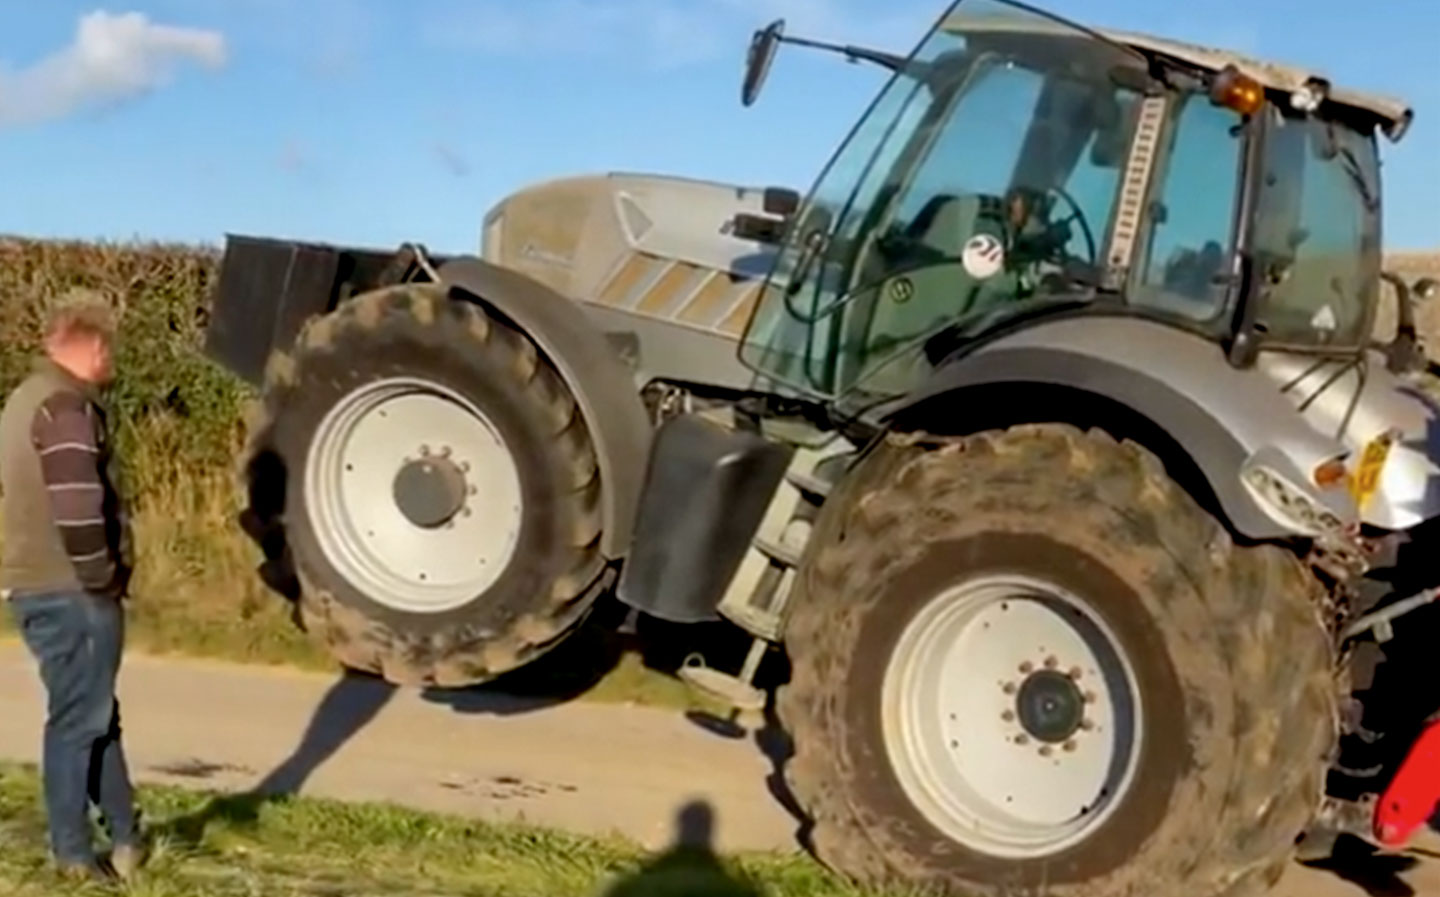 Clarkson releases video a tractor at his Diddly Squat farm